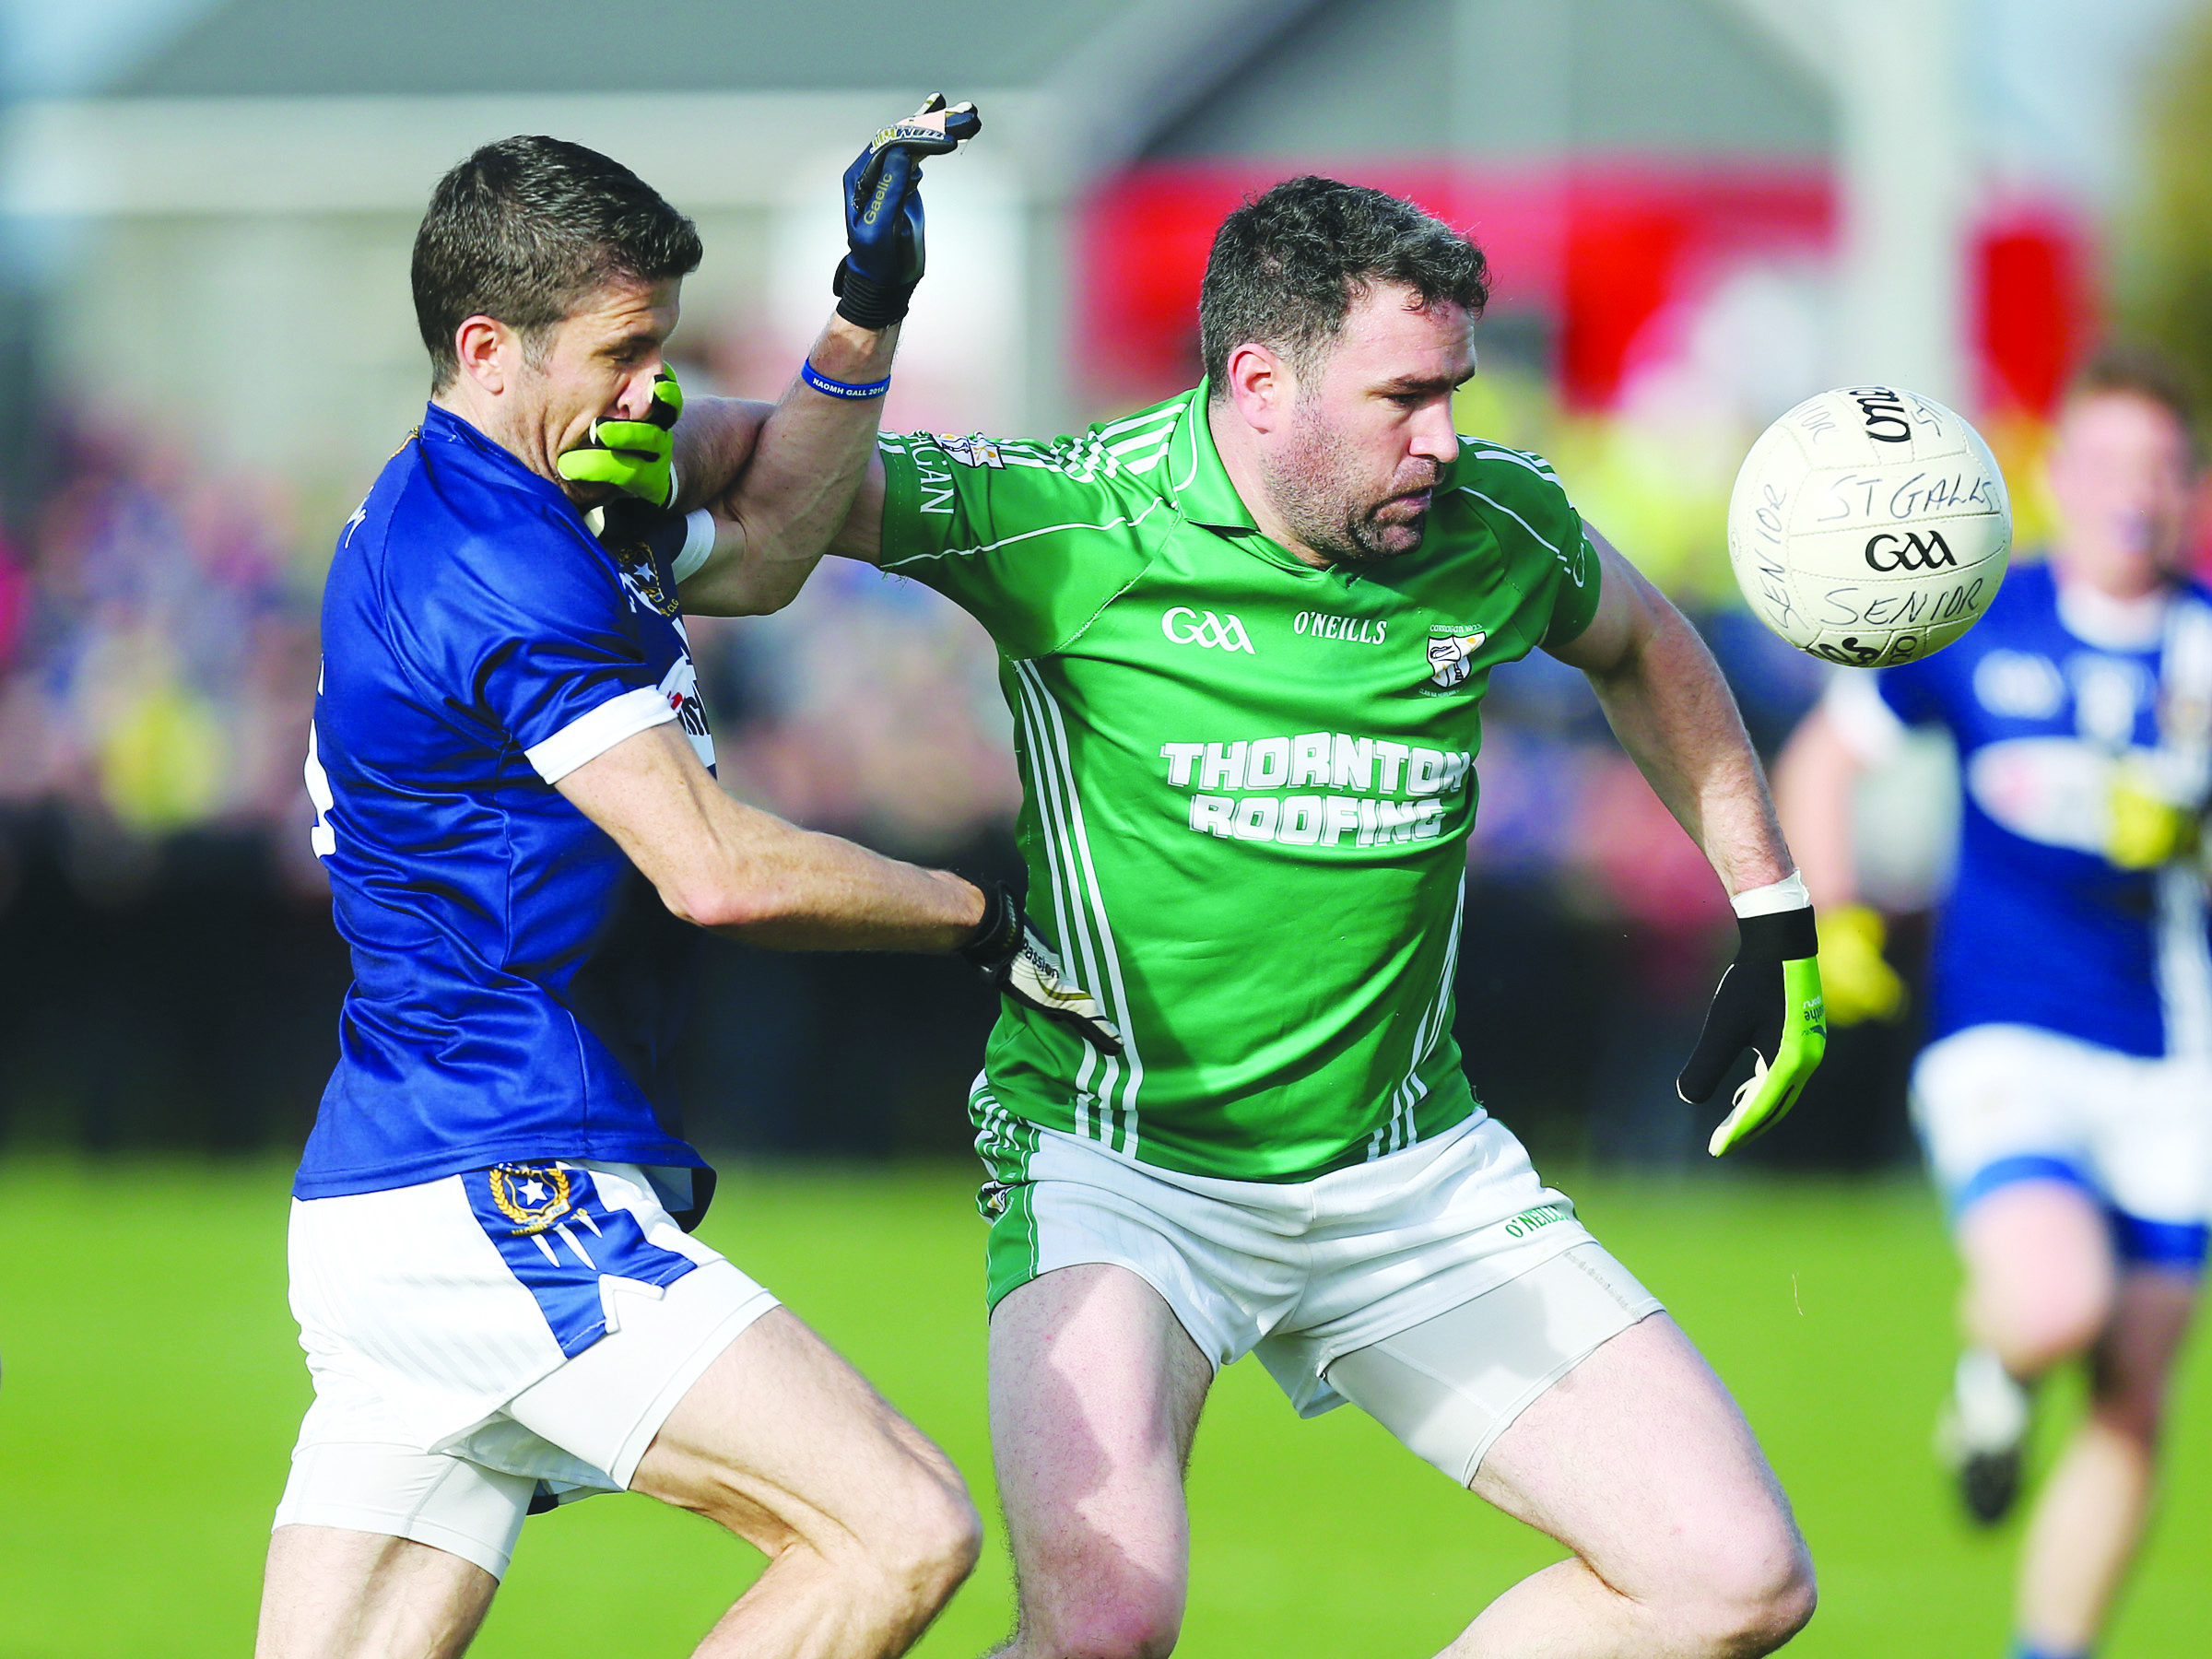 Sean Kelly and Michael Magill will renew acquaintances this Sunday when St Gall’s clash with Cargin in the Antrim Senior Football Championship final at Corrigan Park 